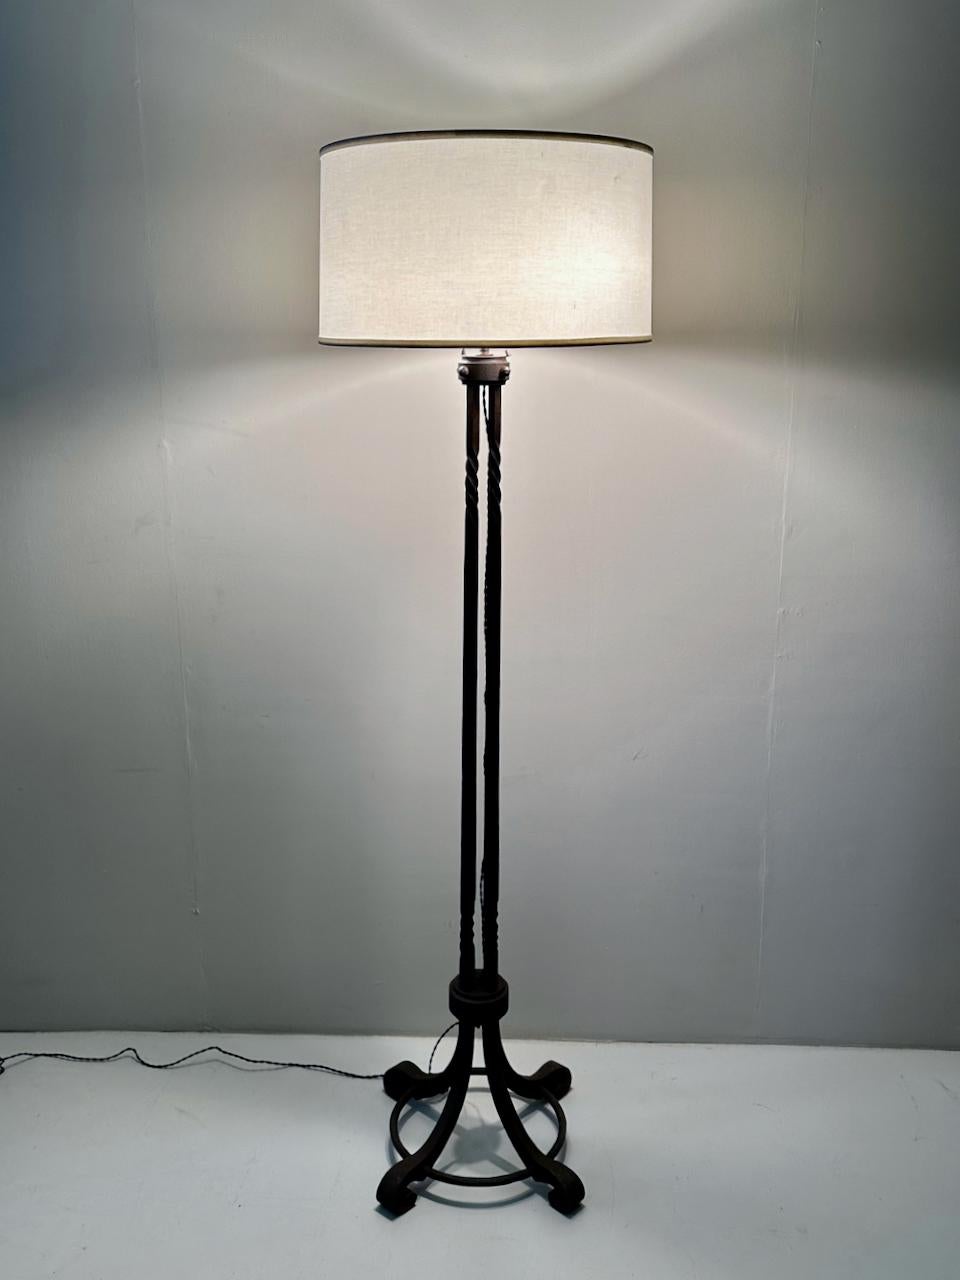 Tall Early 20th Century American Arts & Crafts detailed Wrought Iron Reading Floor Lamp. Featuring four twist detailed square columns on a splayed, balanced, heavily worked hammered base. Warm dark Iron patina. Adjustable double Ceramic sockets with